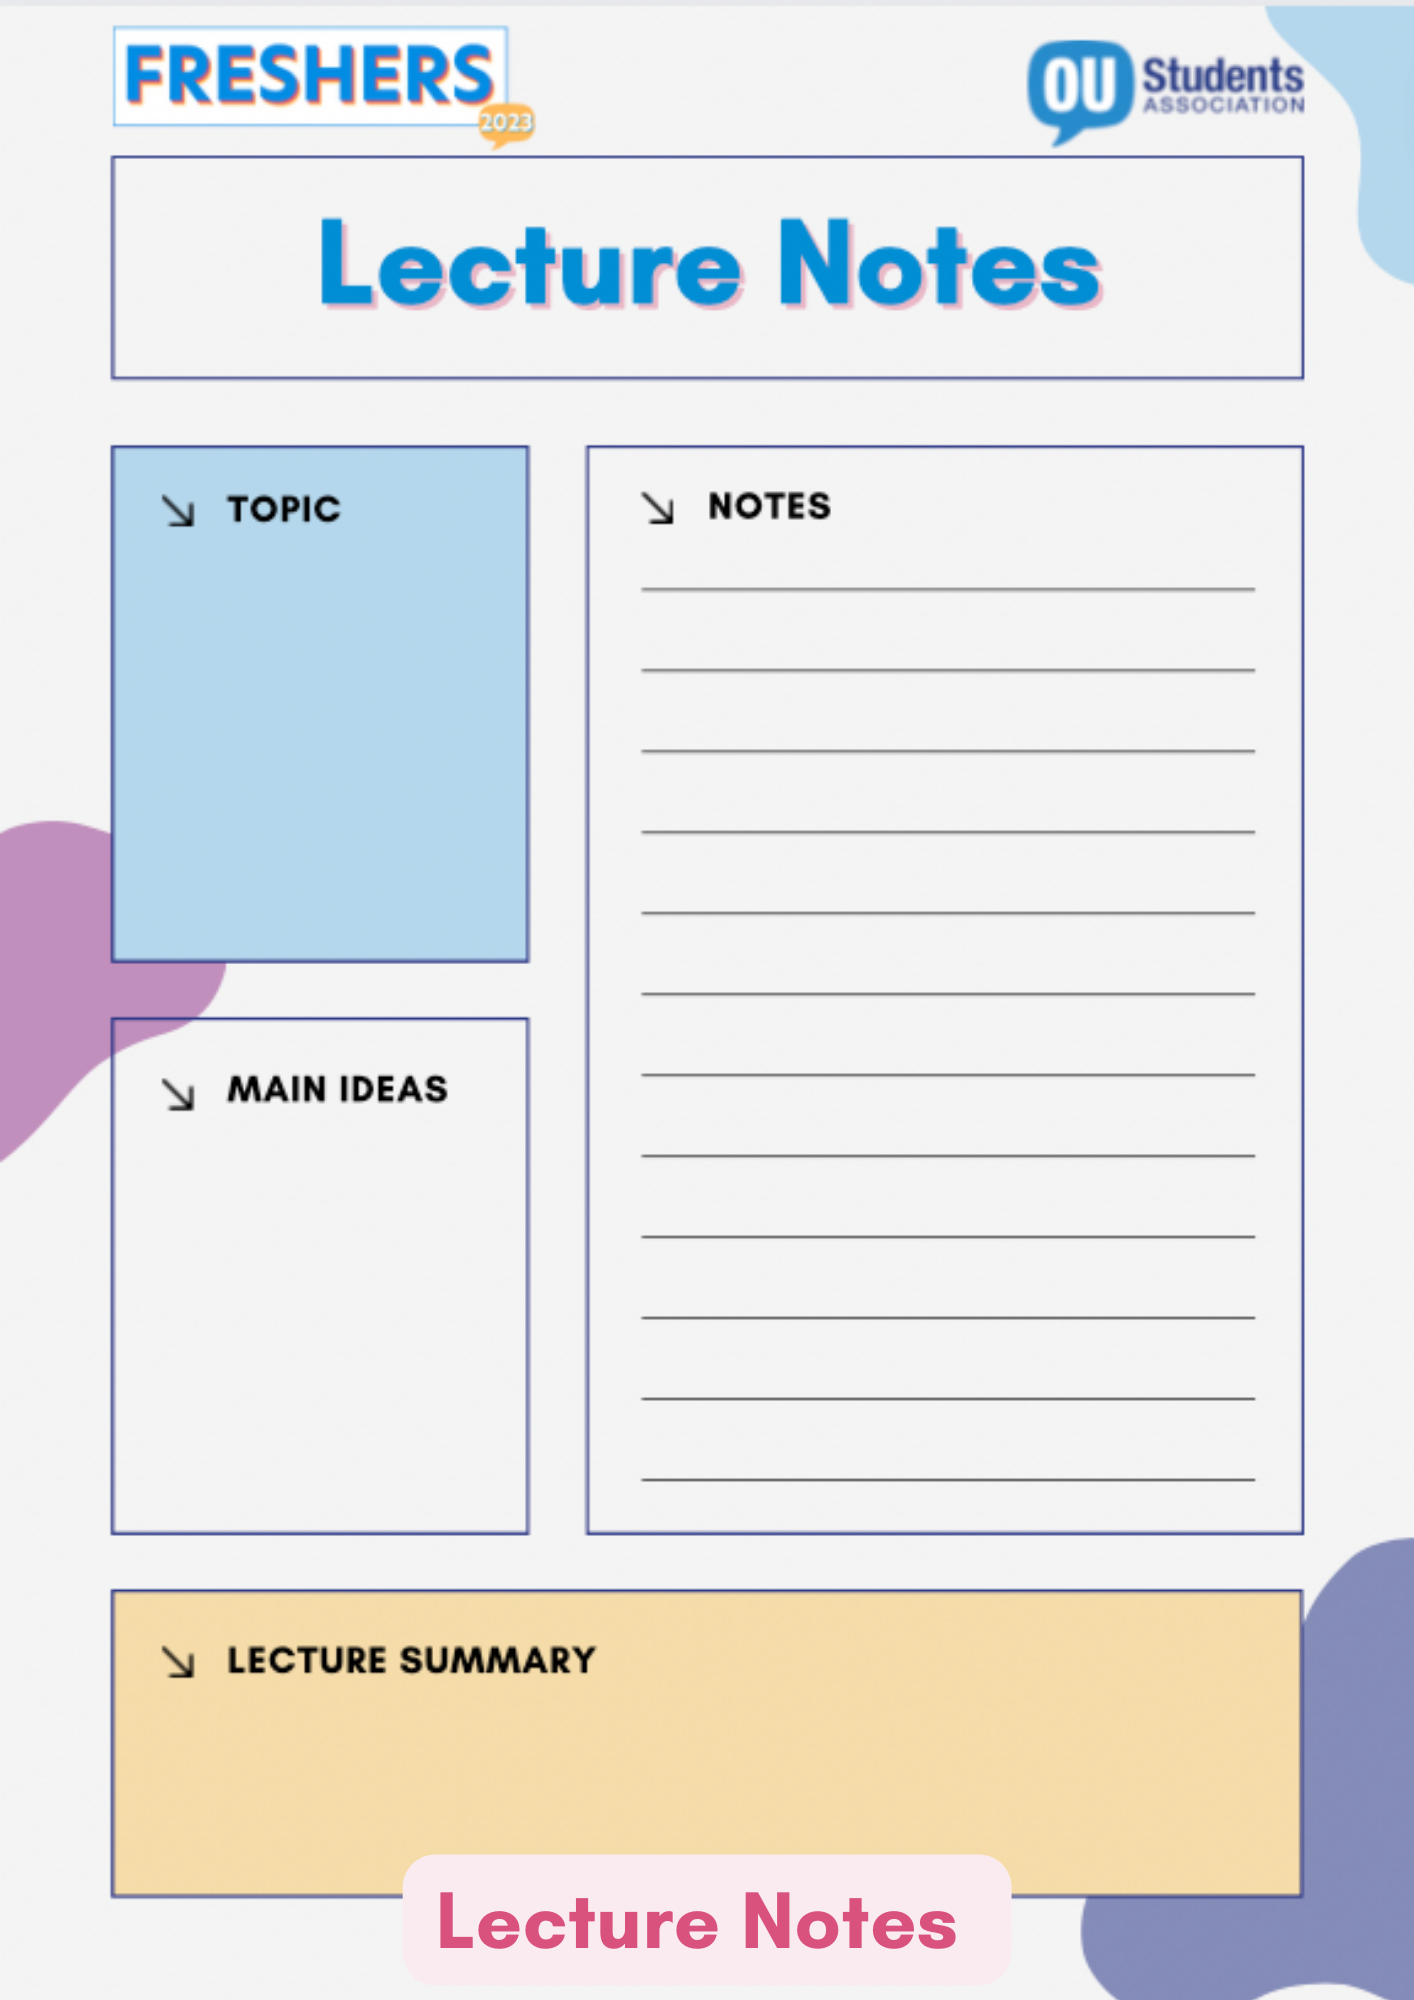 Image reads: Lecture notes. There is space on this page to write your Topic, Notes and lecture summary.